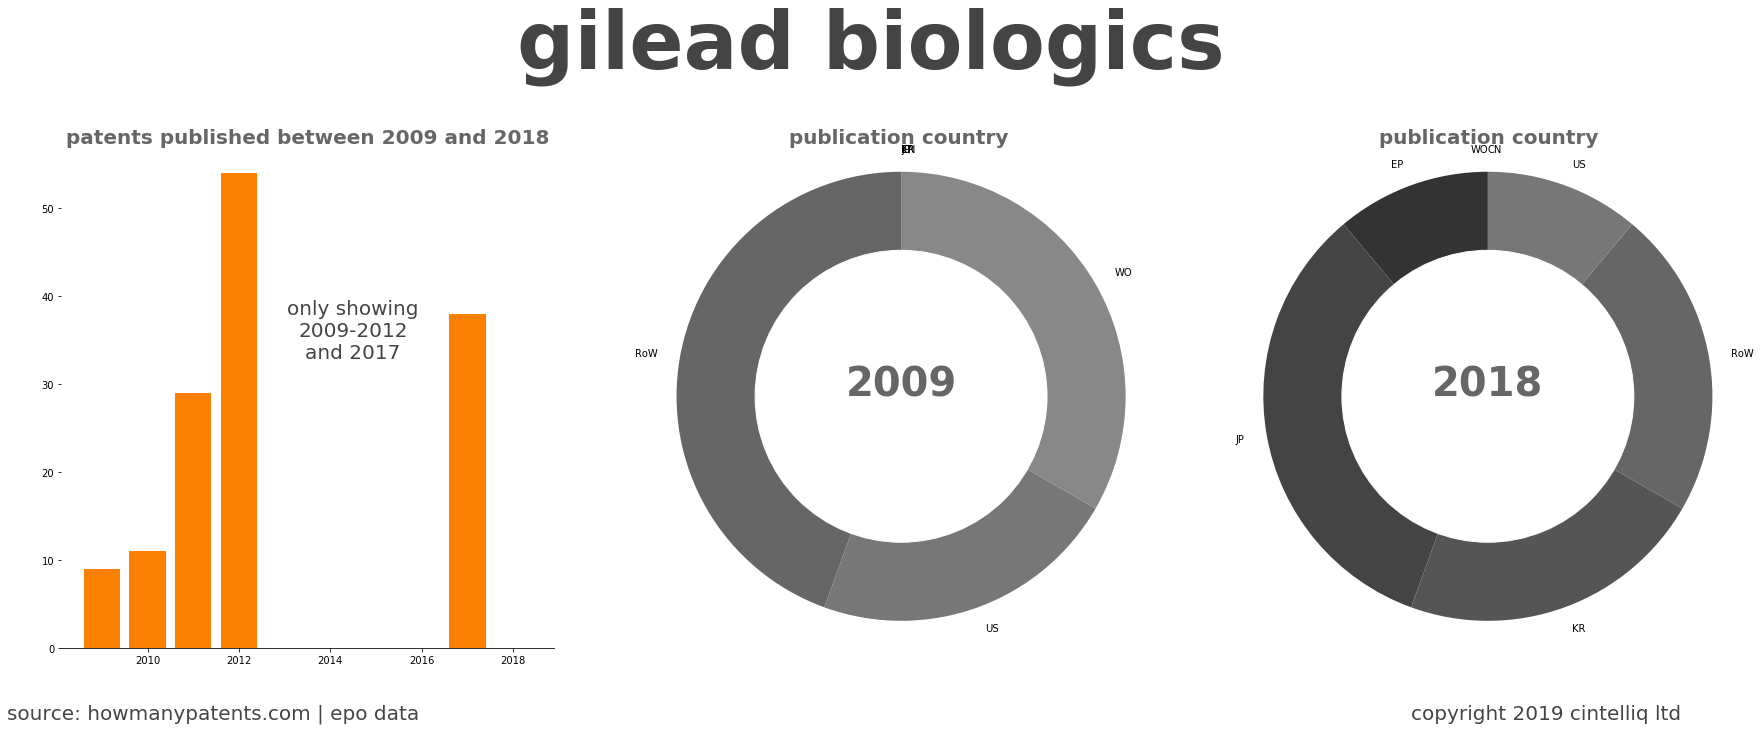 summary of patents for Gilead Biologics